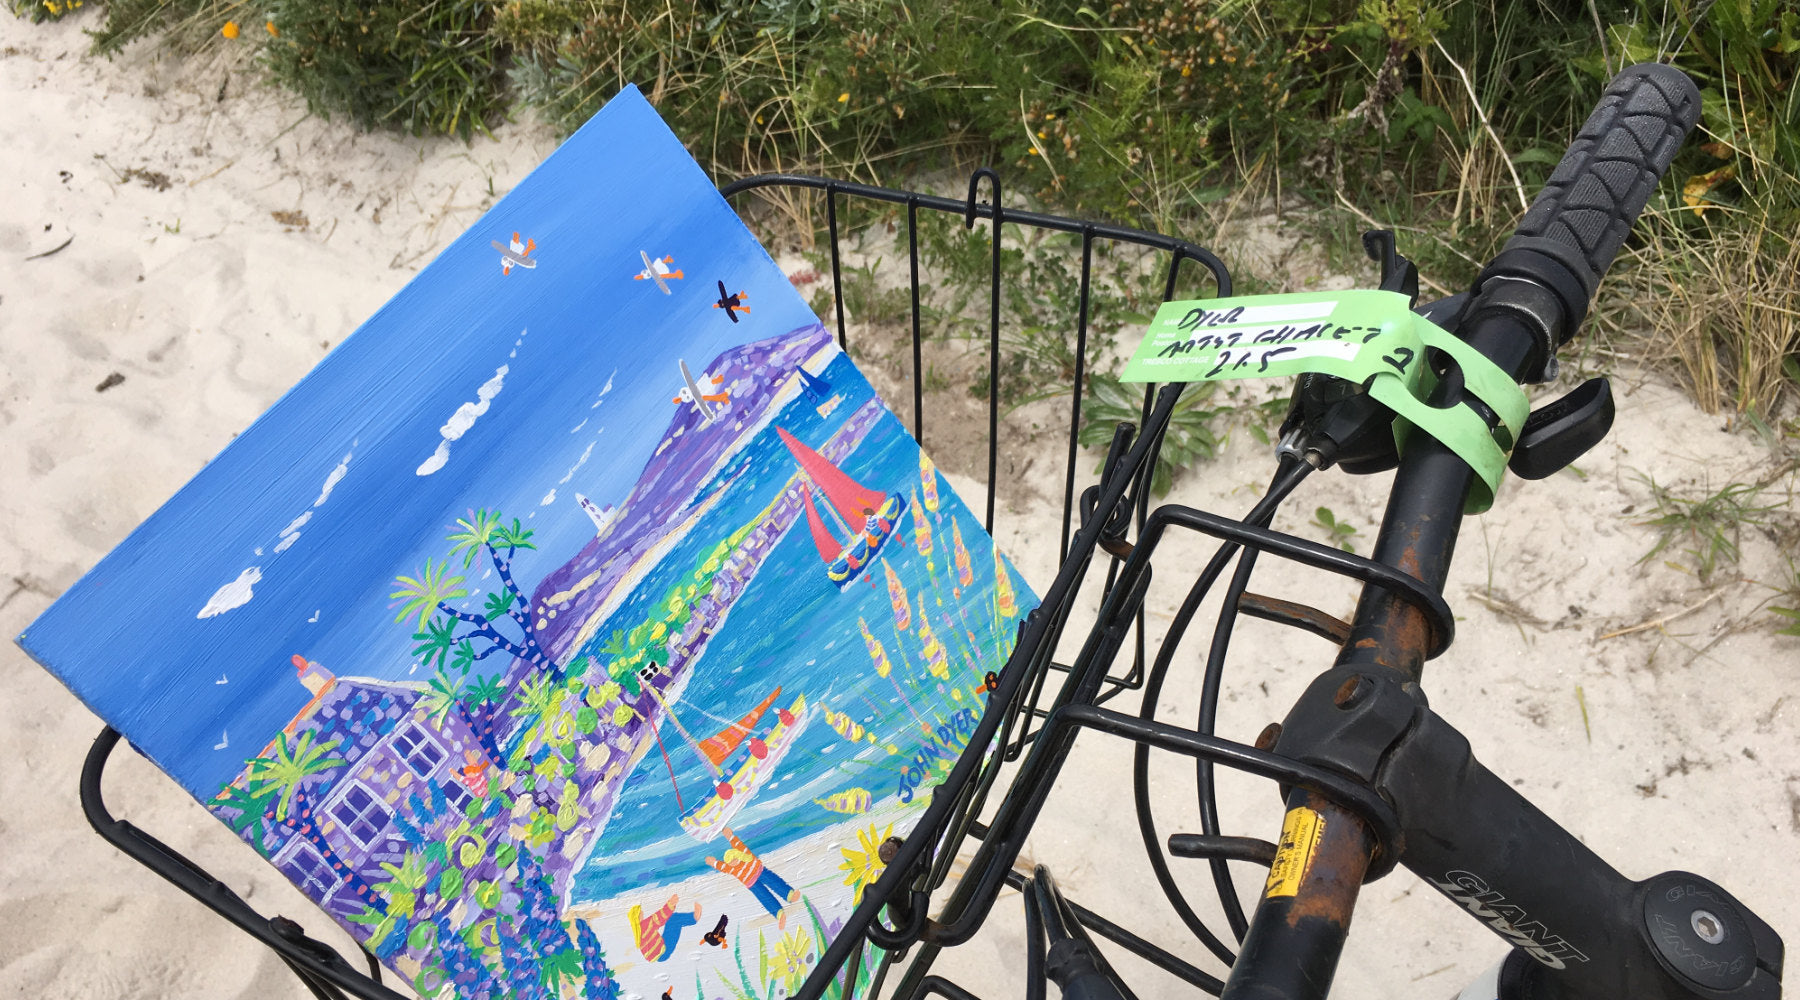 John Dyer painting of the beach pictured in a bike basket on the island of Tresco, Cornwall